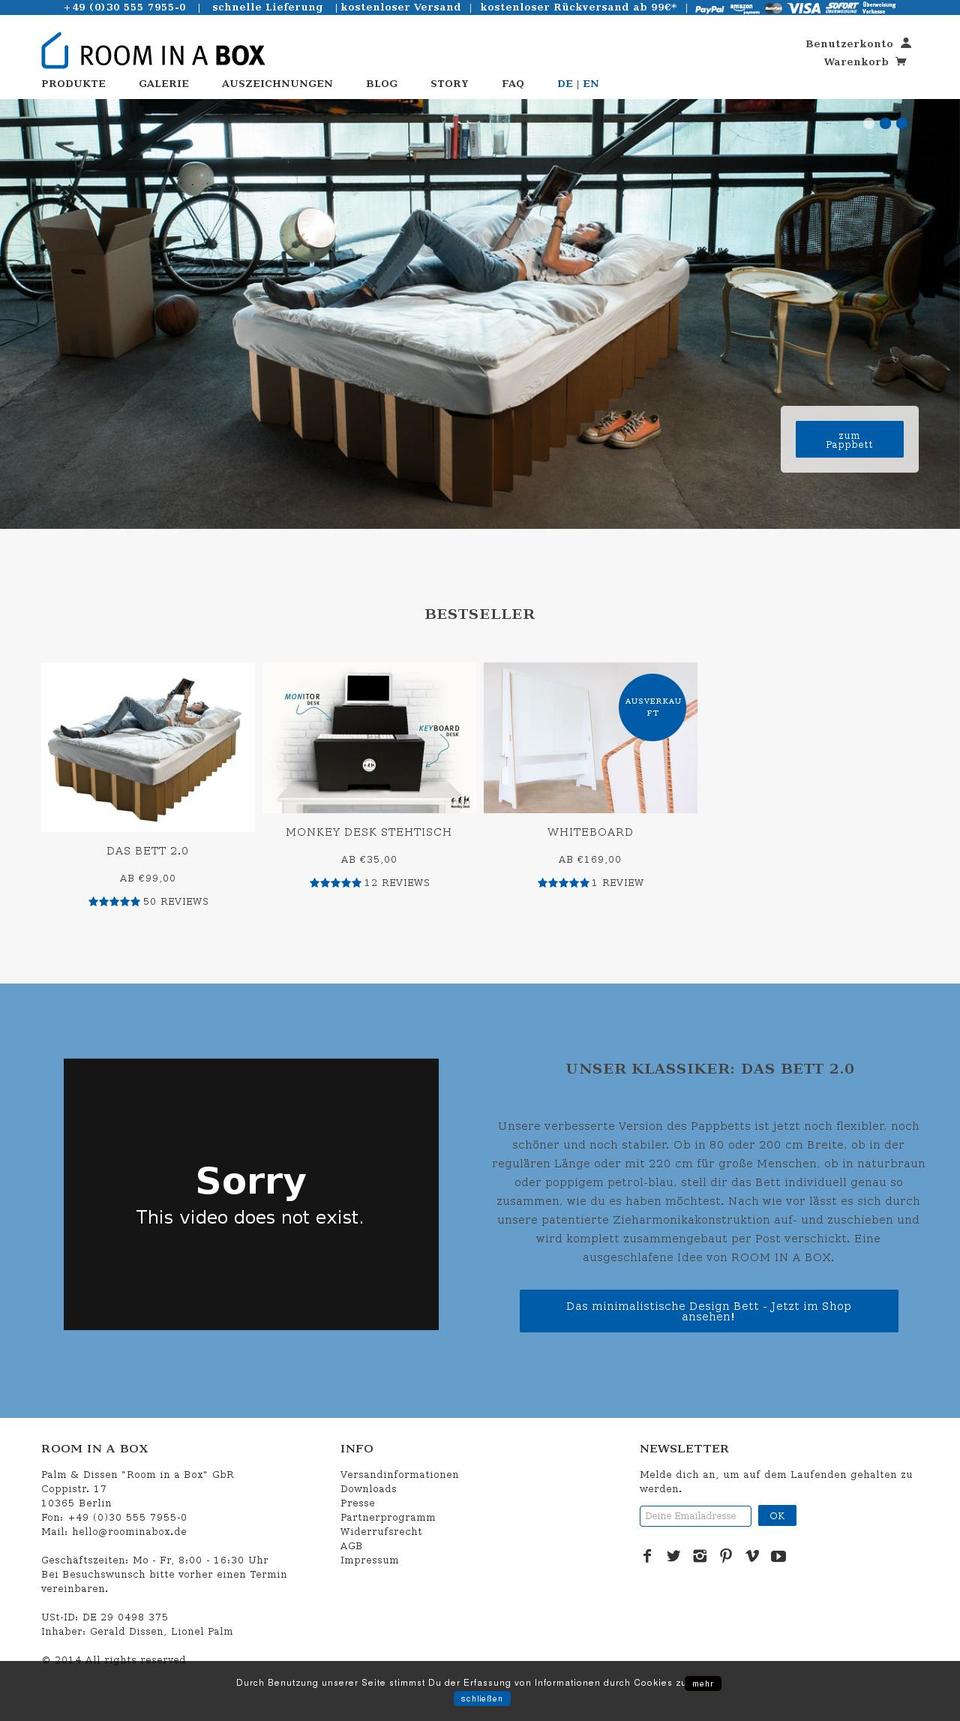 Running 10.3.2015 (language sw + blaues Banner) Shopify theme site example room-in-a-box.org